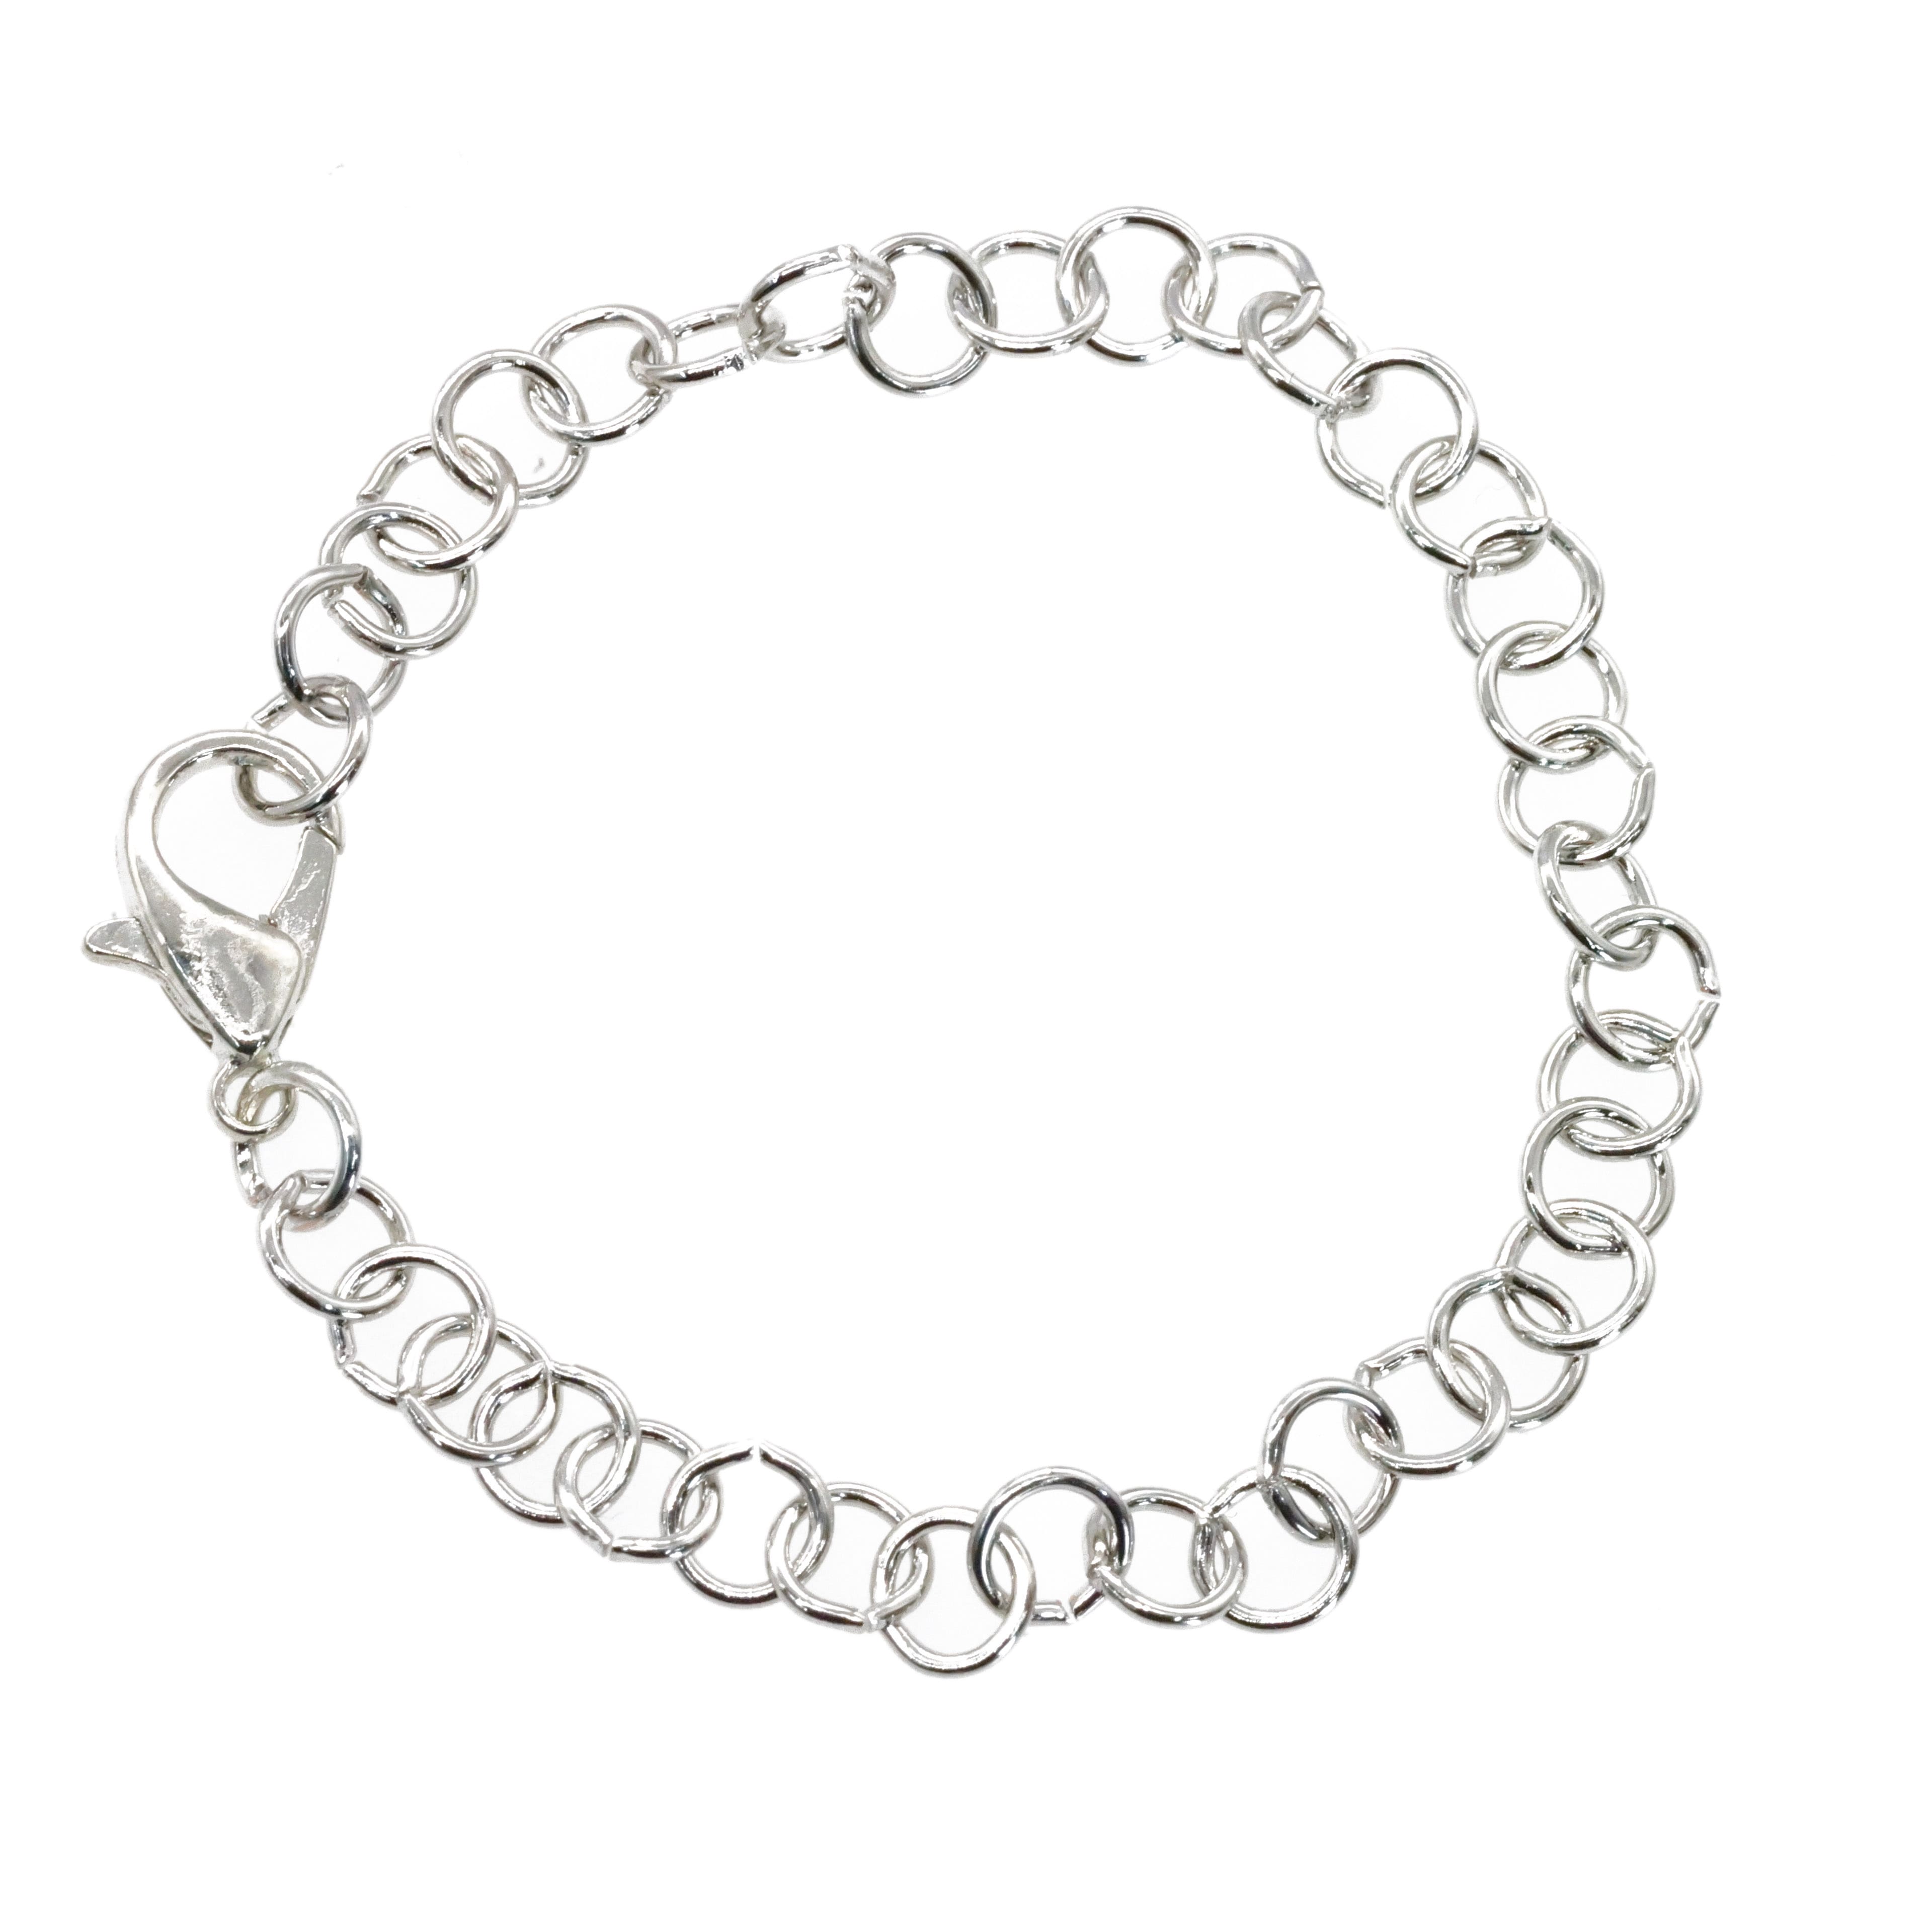 12 Packs: 2 ct. (24 total) Silver Bracelet Chains by Creatology&#x2122;